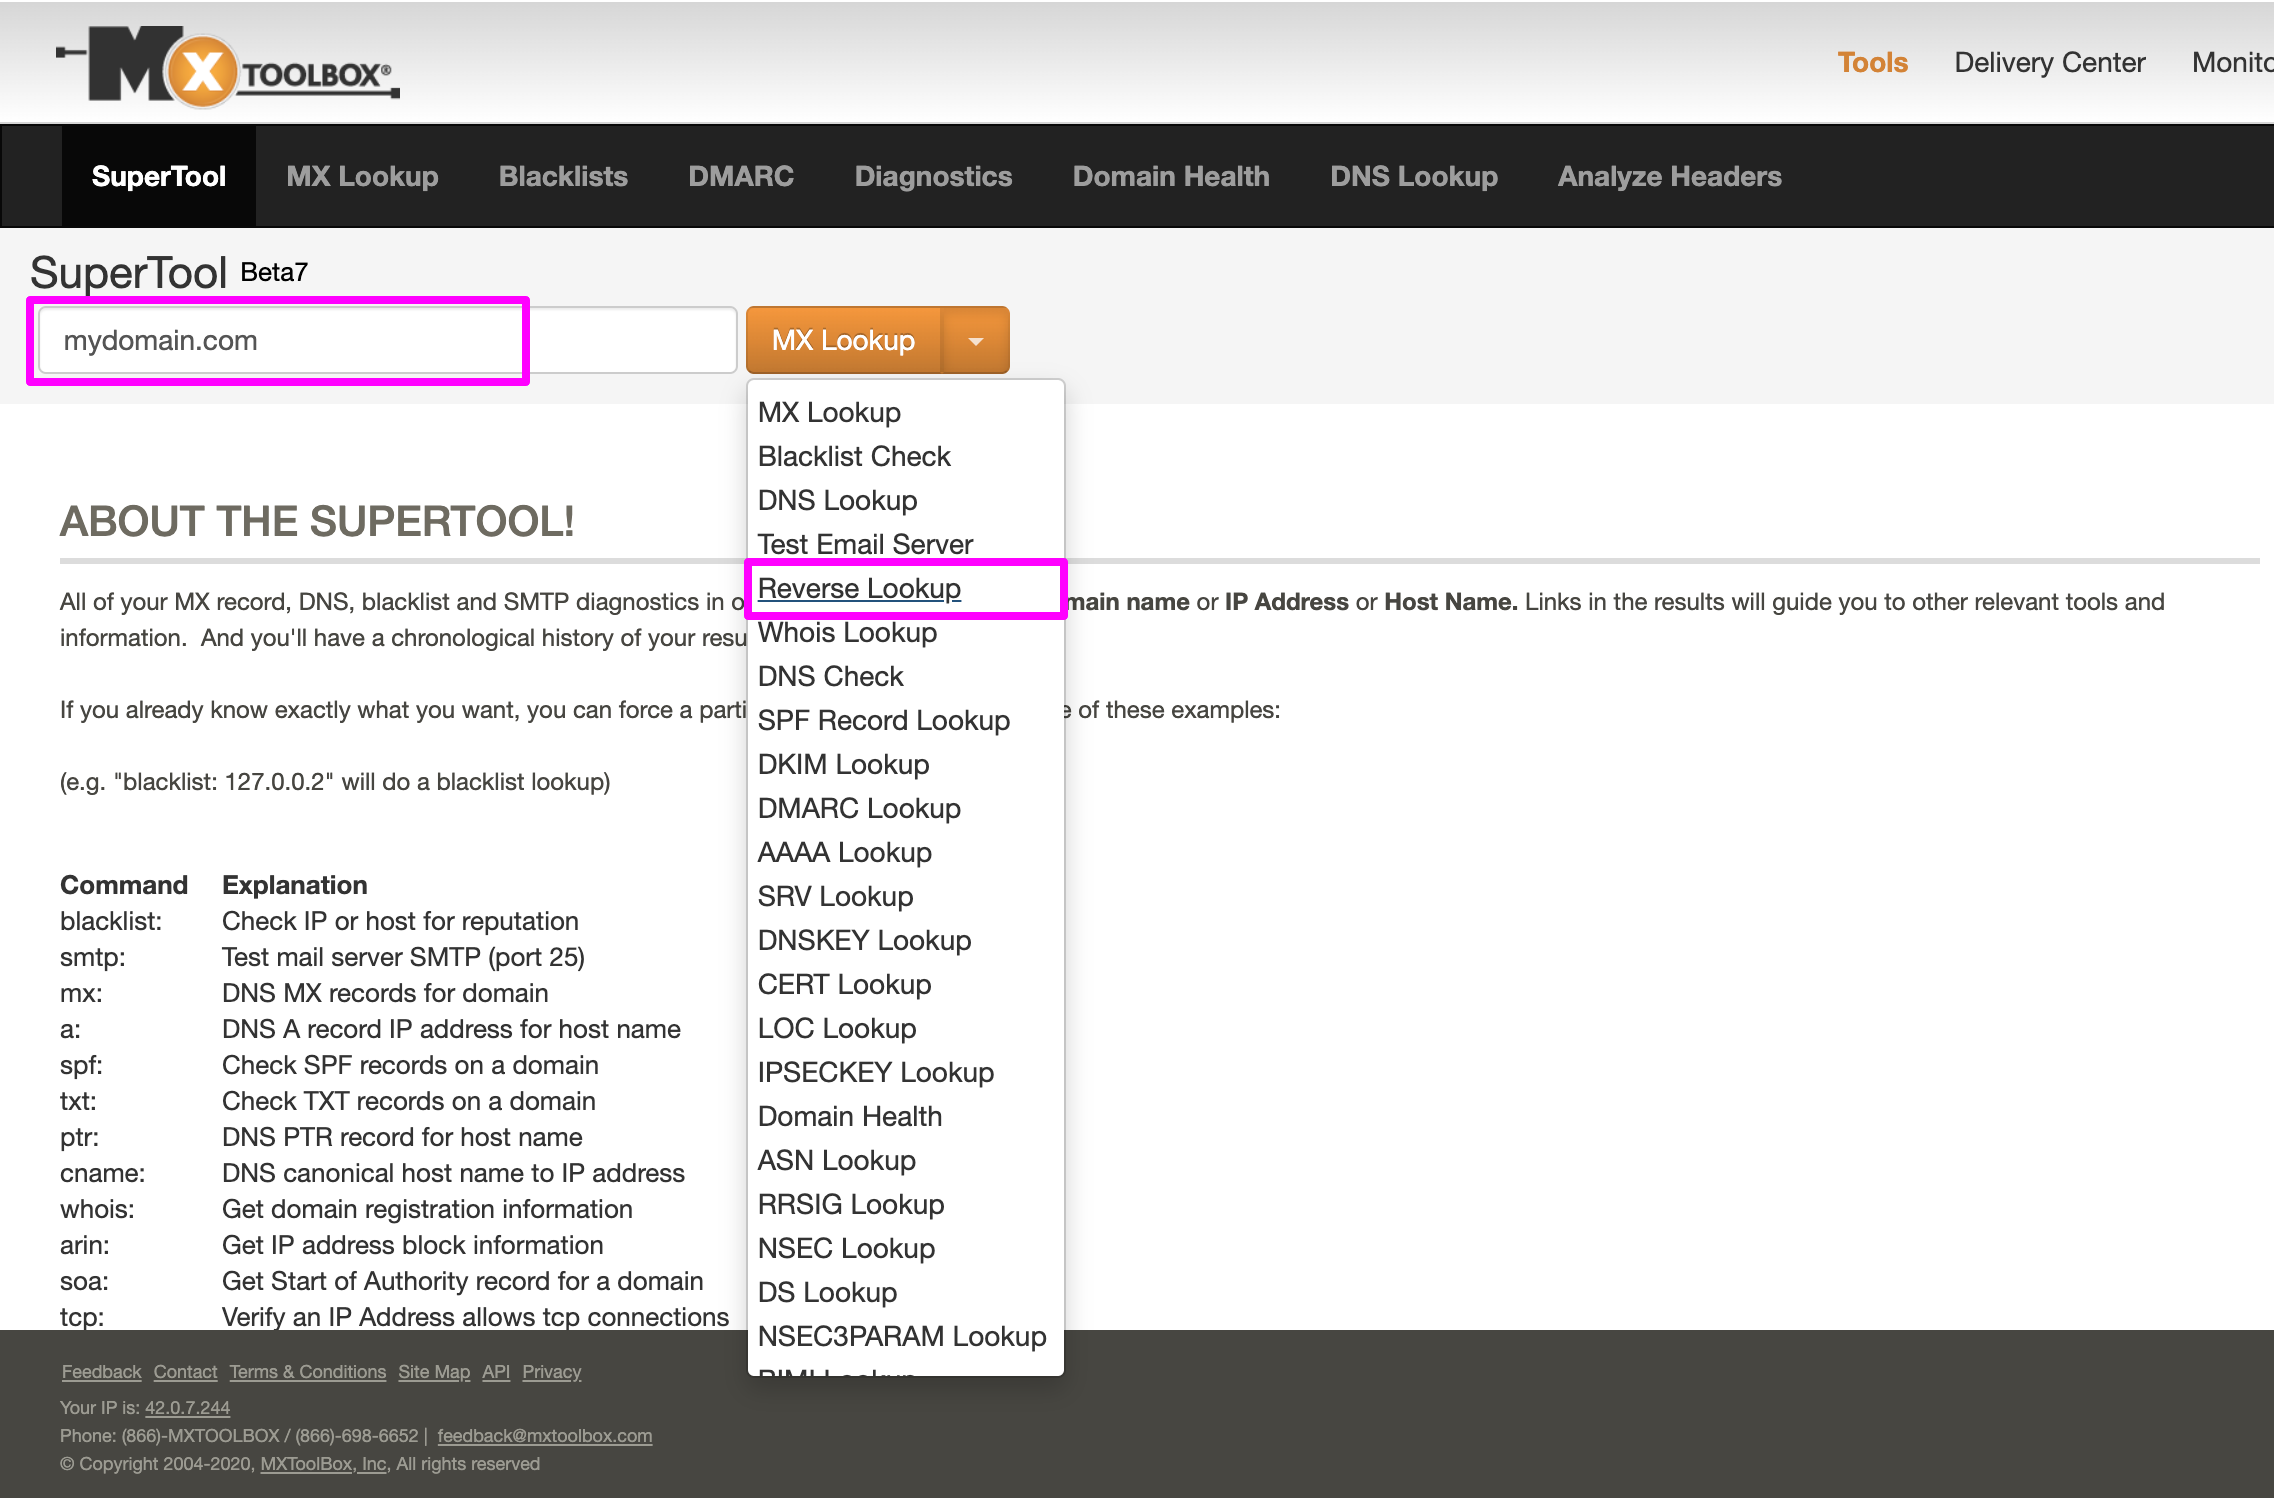 In MxToolbox for PTR verification, entering the domain name and selecting Reverse Lookup from the dropdown options.